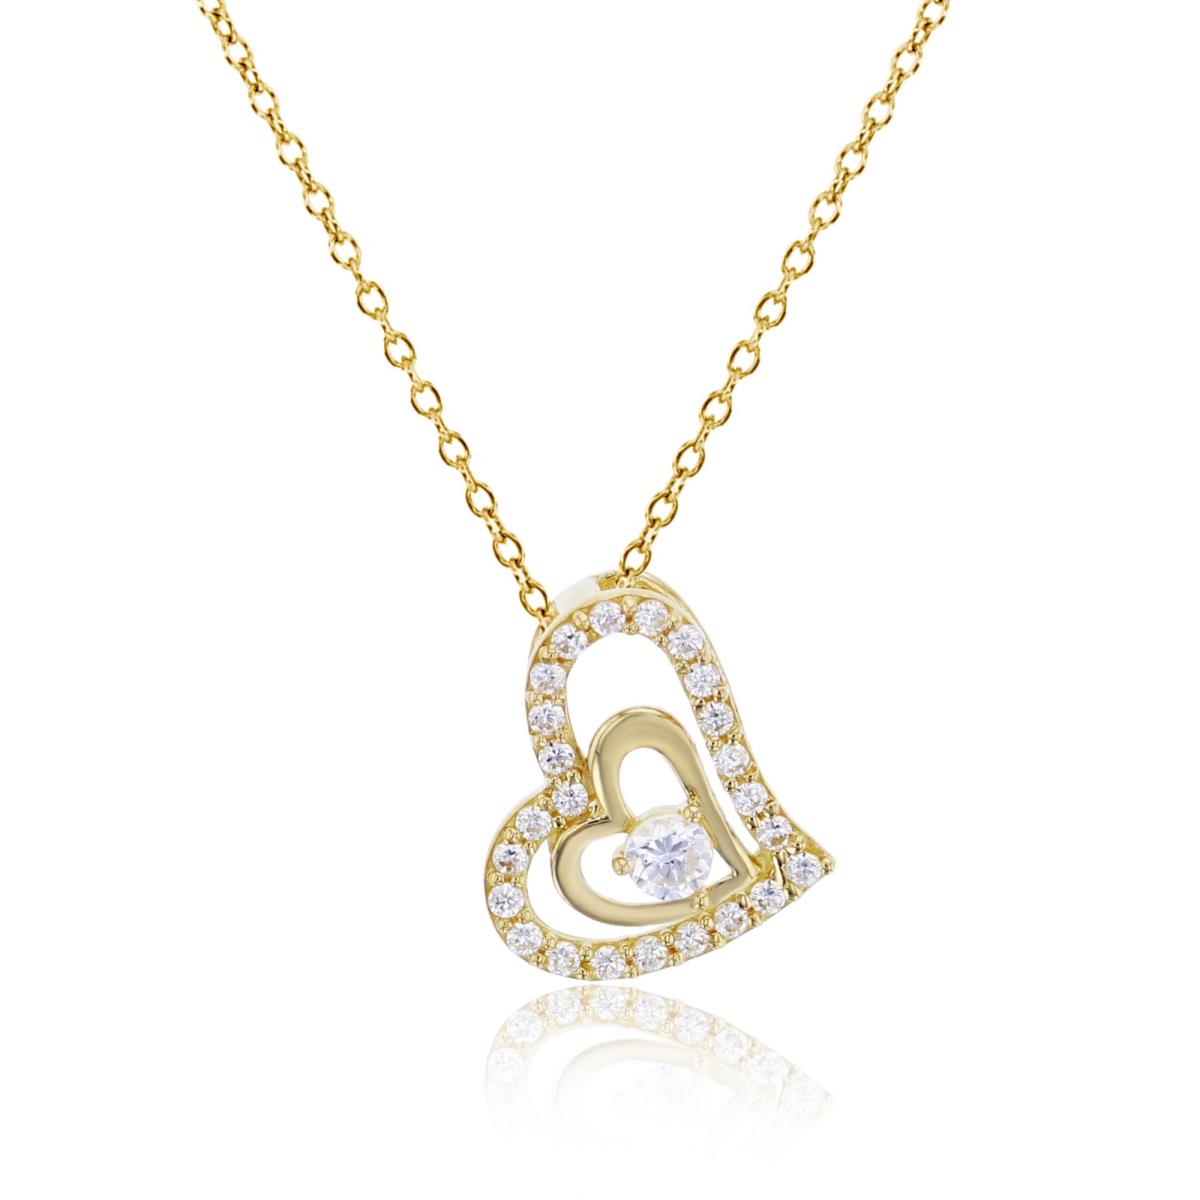 14K Yellow Gold 2.5mm Rd Cut CZ Inside Micropave & Polished Open Hearts 18" Necklace